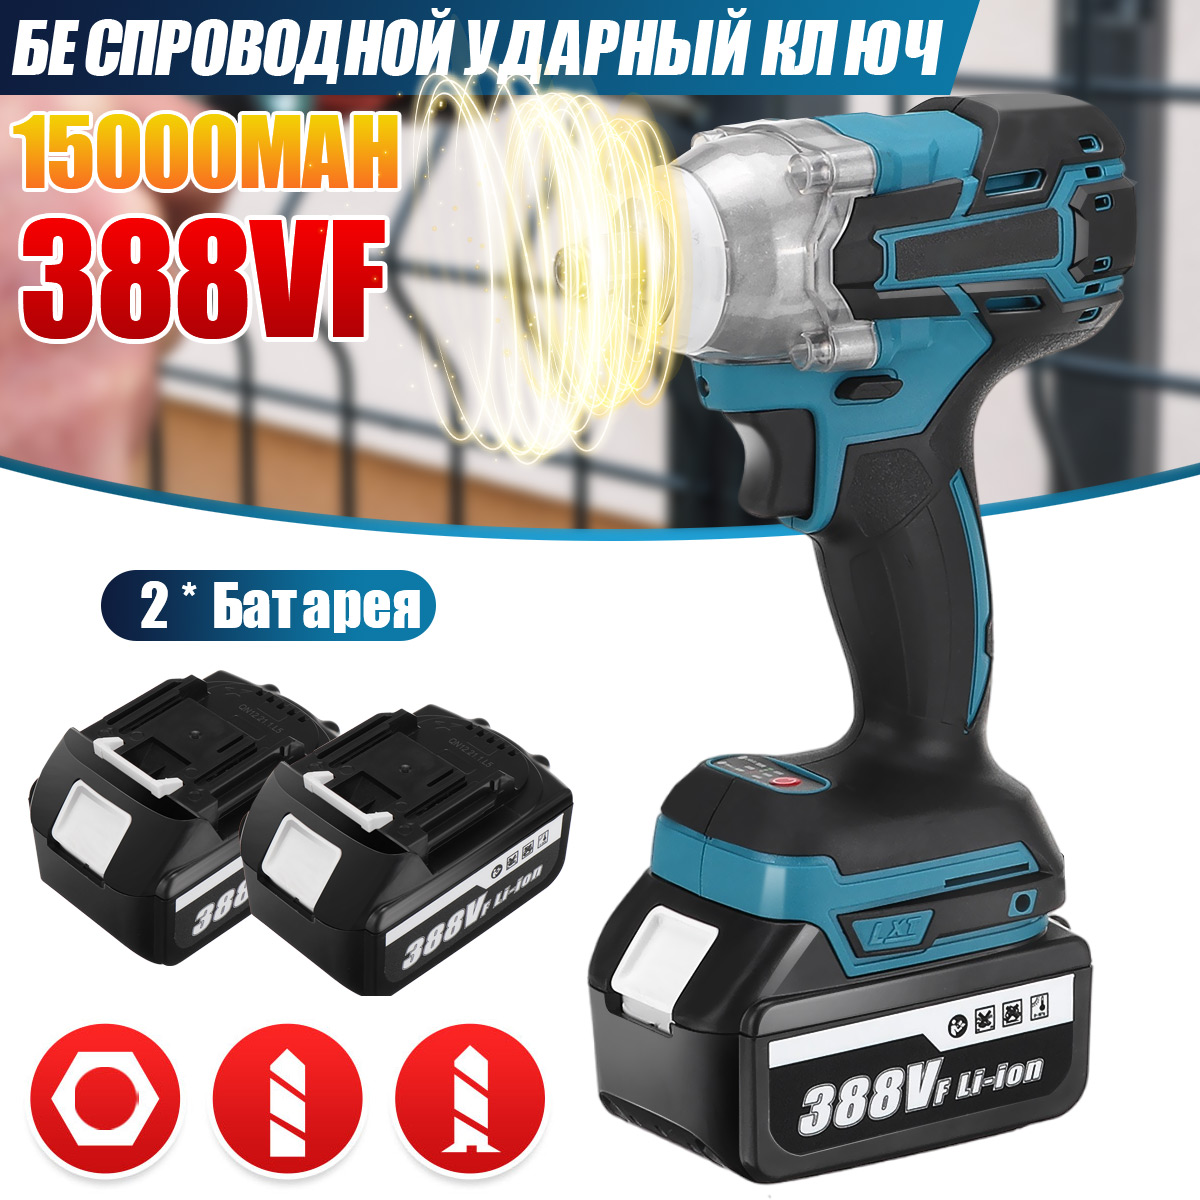 BLMIATKO-388VF-520Nm-Electric-Brushless-Impact-Wrench-Rechargeable-Woodworking-Maintenance-Tool-with-1919212-3